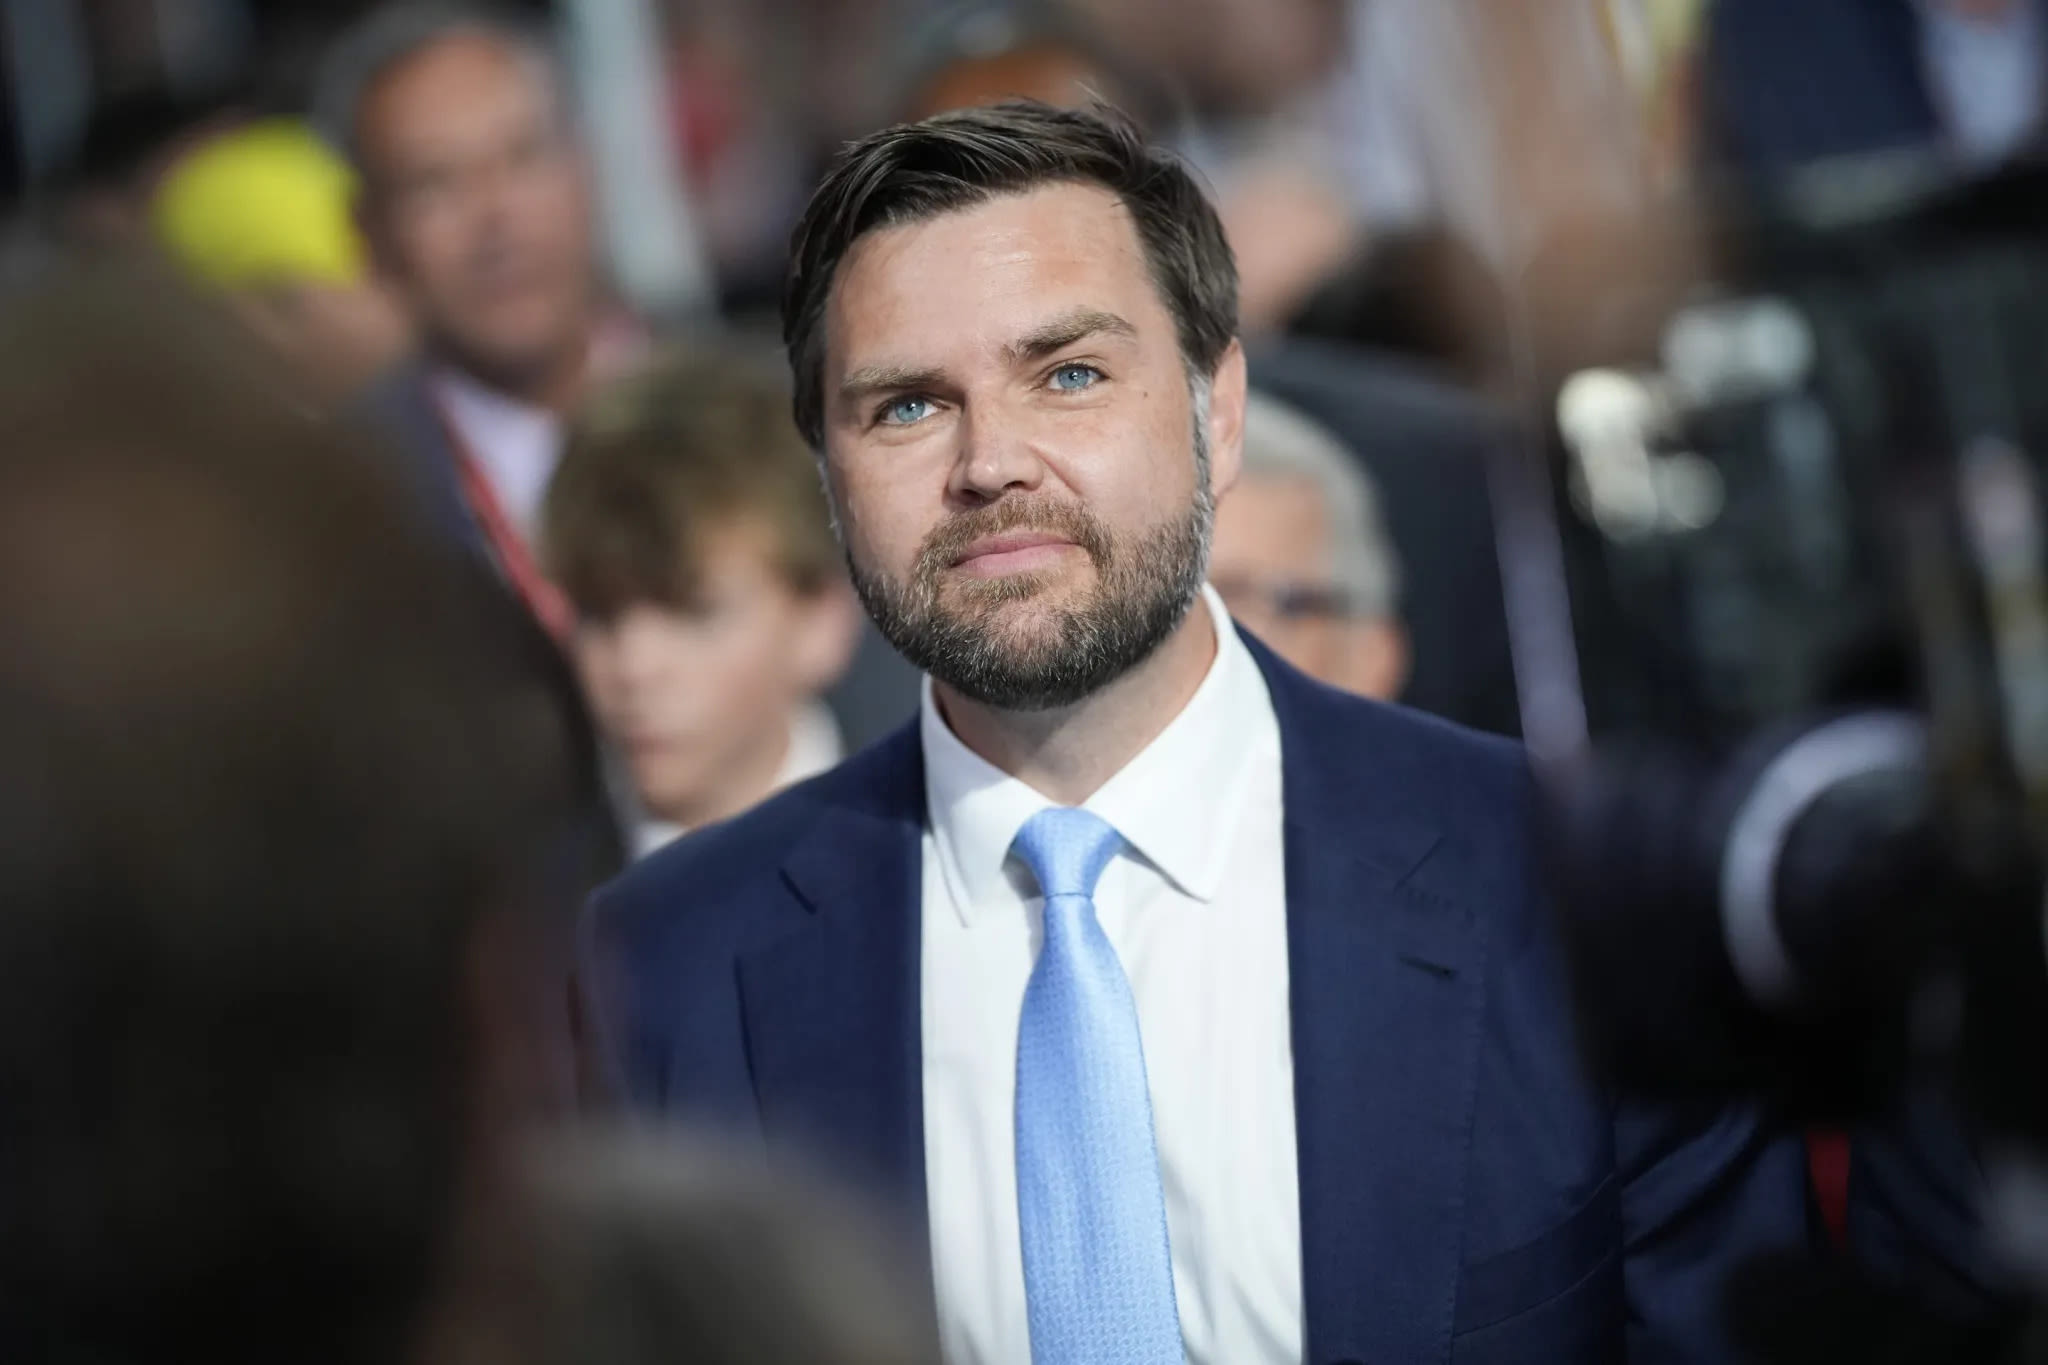 J.D. Vance’s public Venmo account highlights ties to group behind Project 2025—as well as alumni of ‘elite universities’ the nominee has condemned